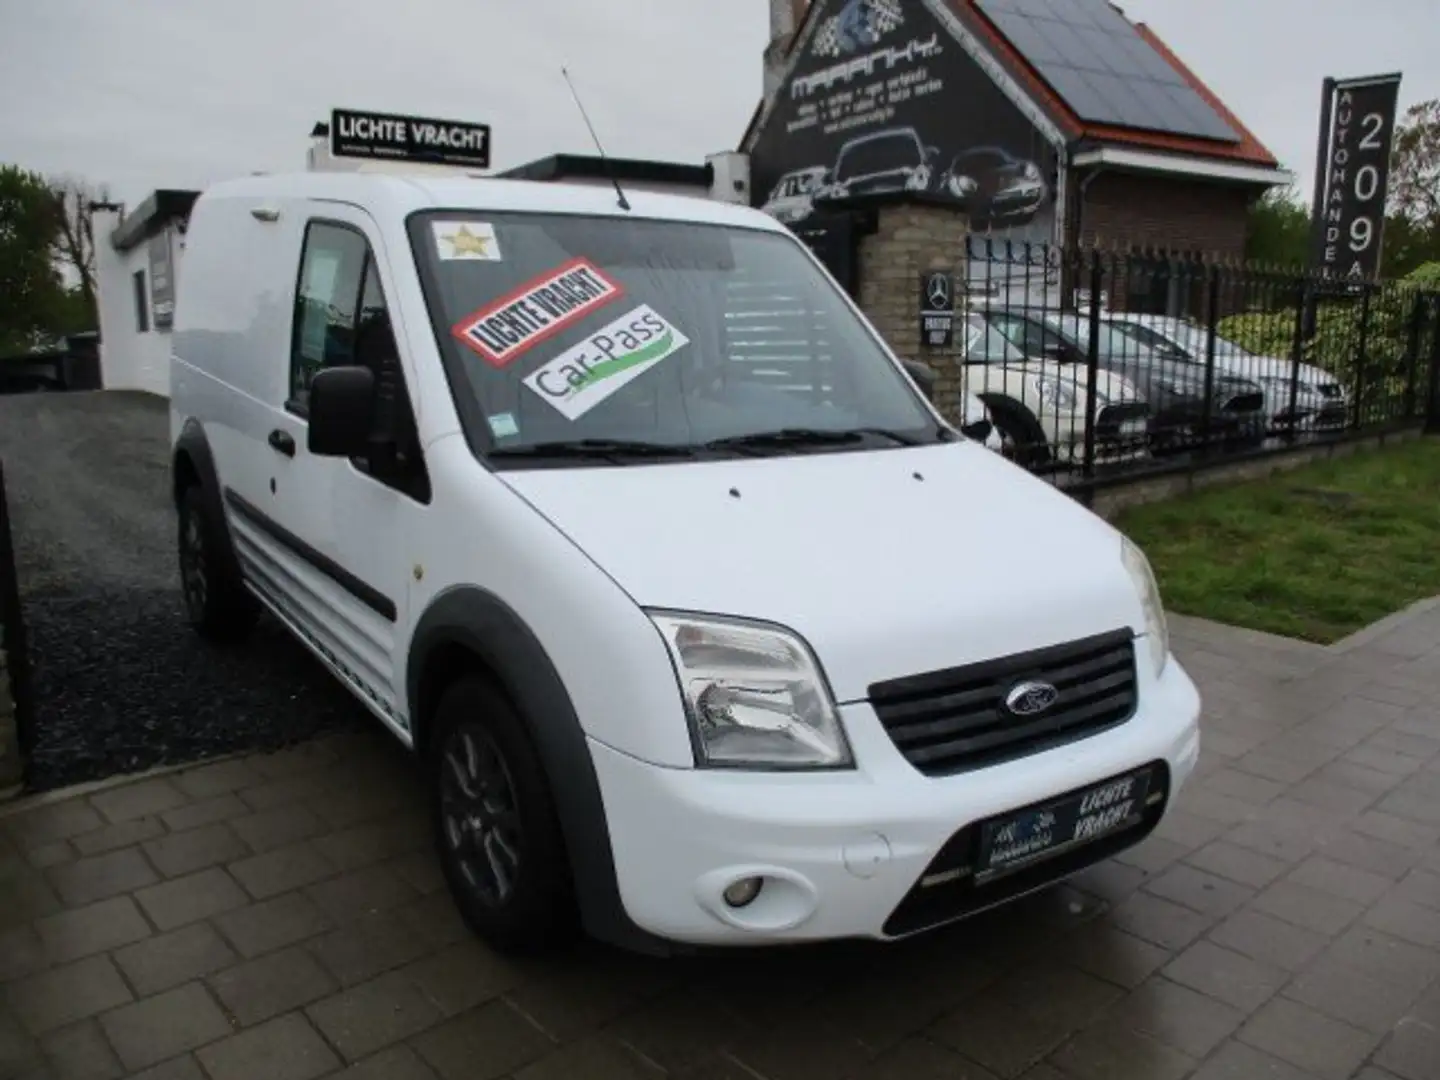 Ford Transit Connect 1.8TDCI AMBIENTE LICHTE VRACHT 2PL AIRCO PDC ALU White - 1